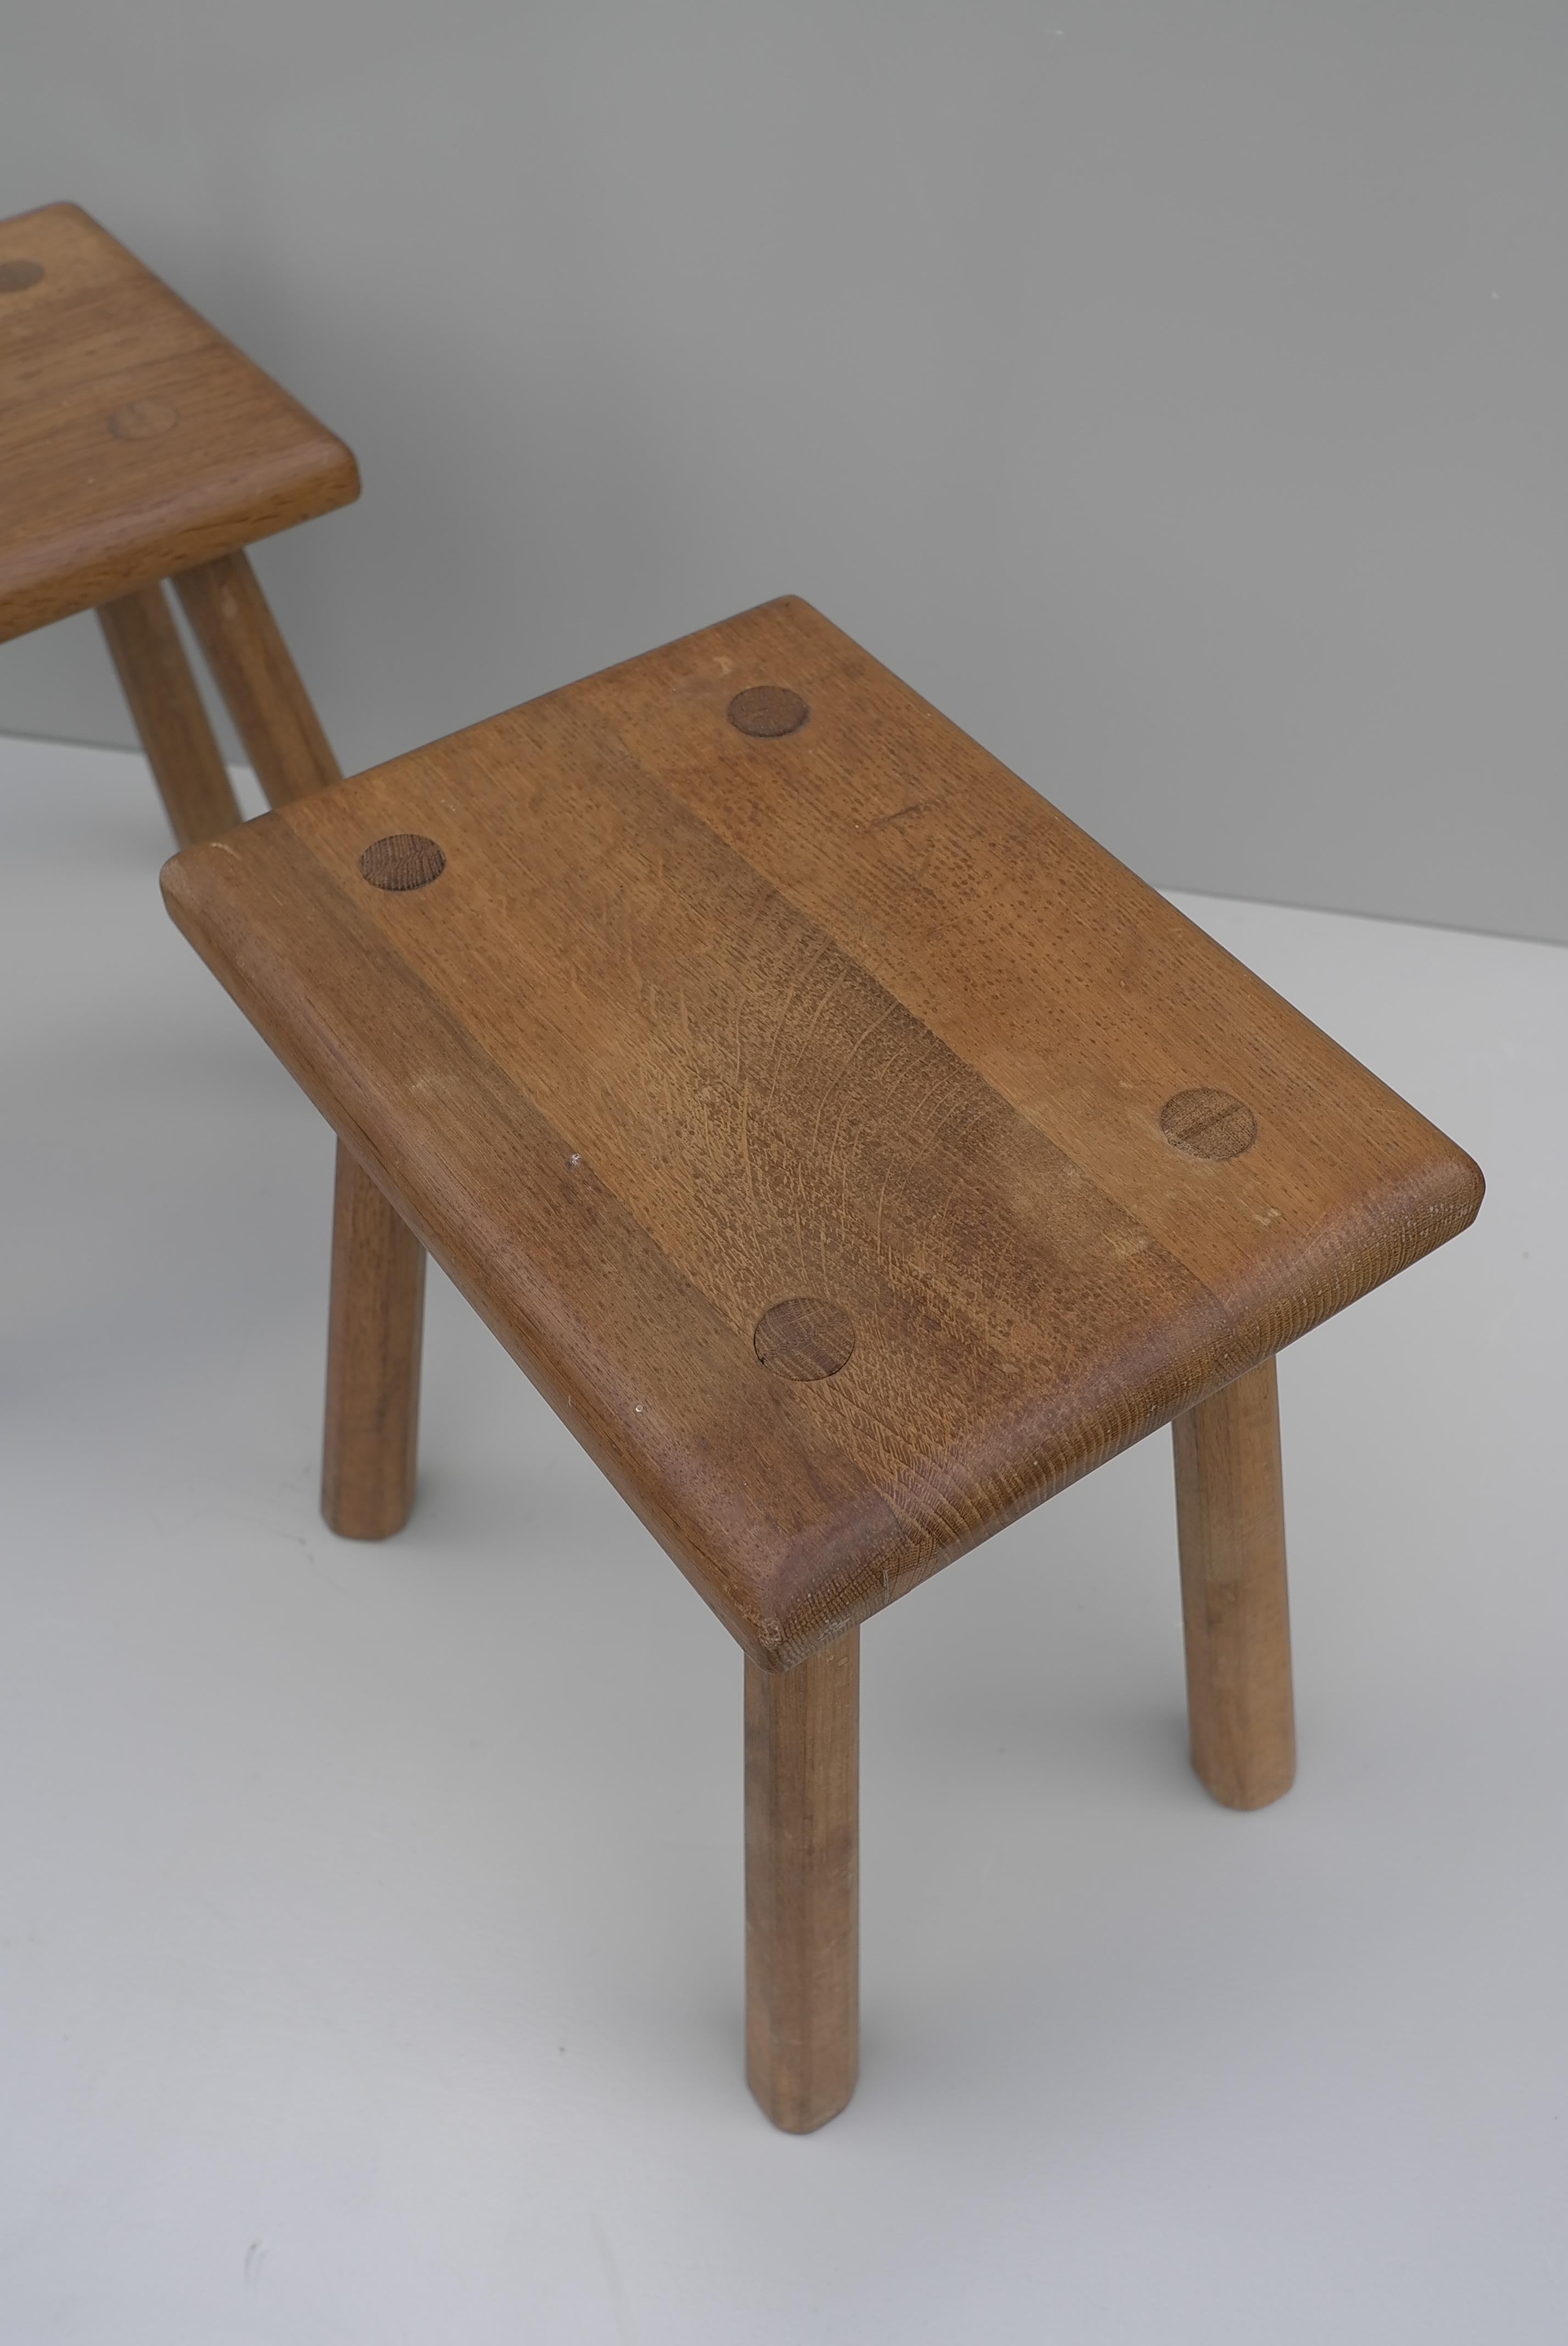 Solid Oak side tables, France 1960's

Can also be used as a stool, a third table is available. Price is for a pair.